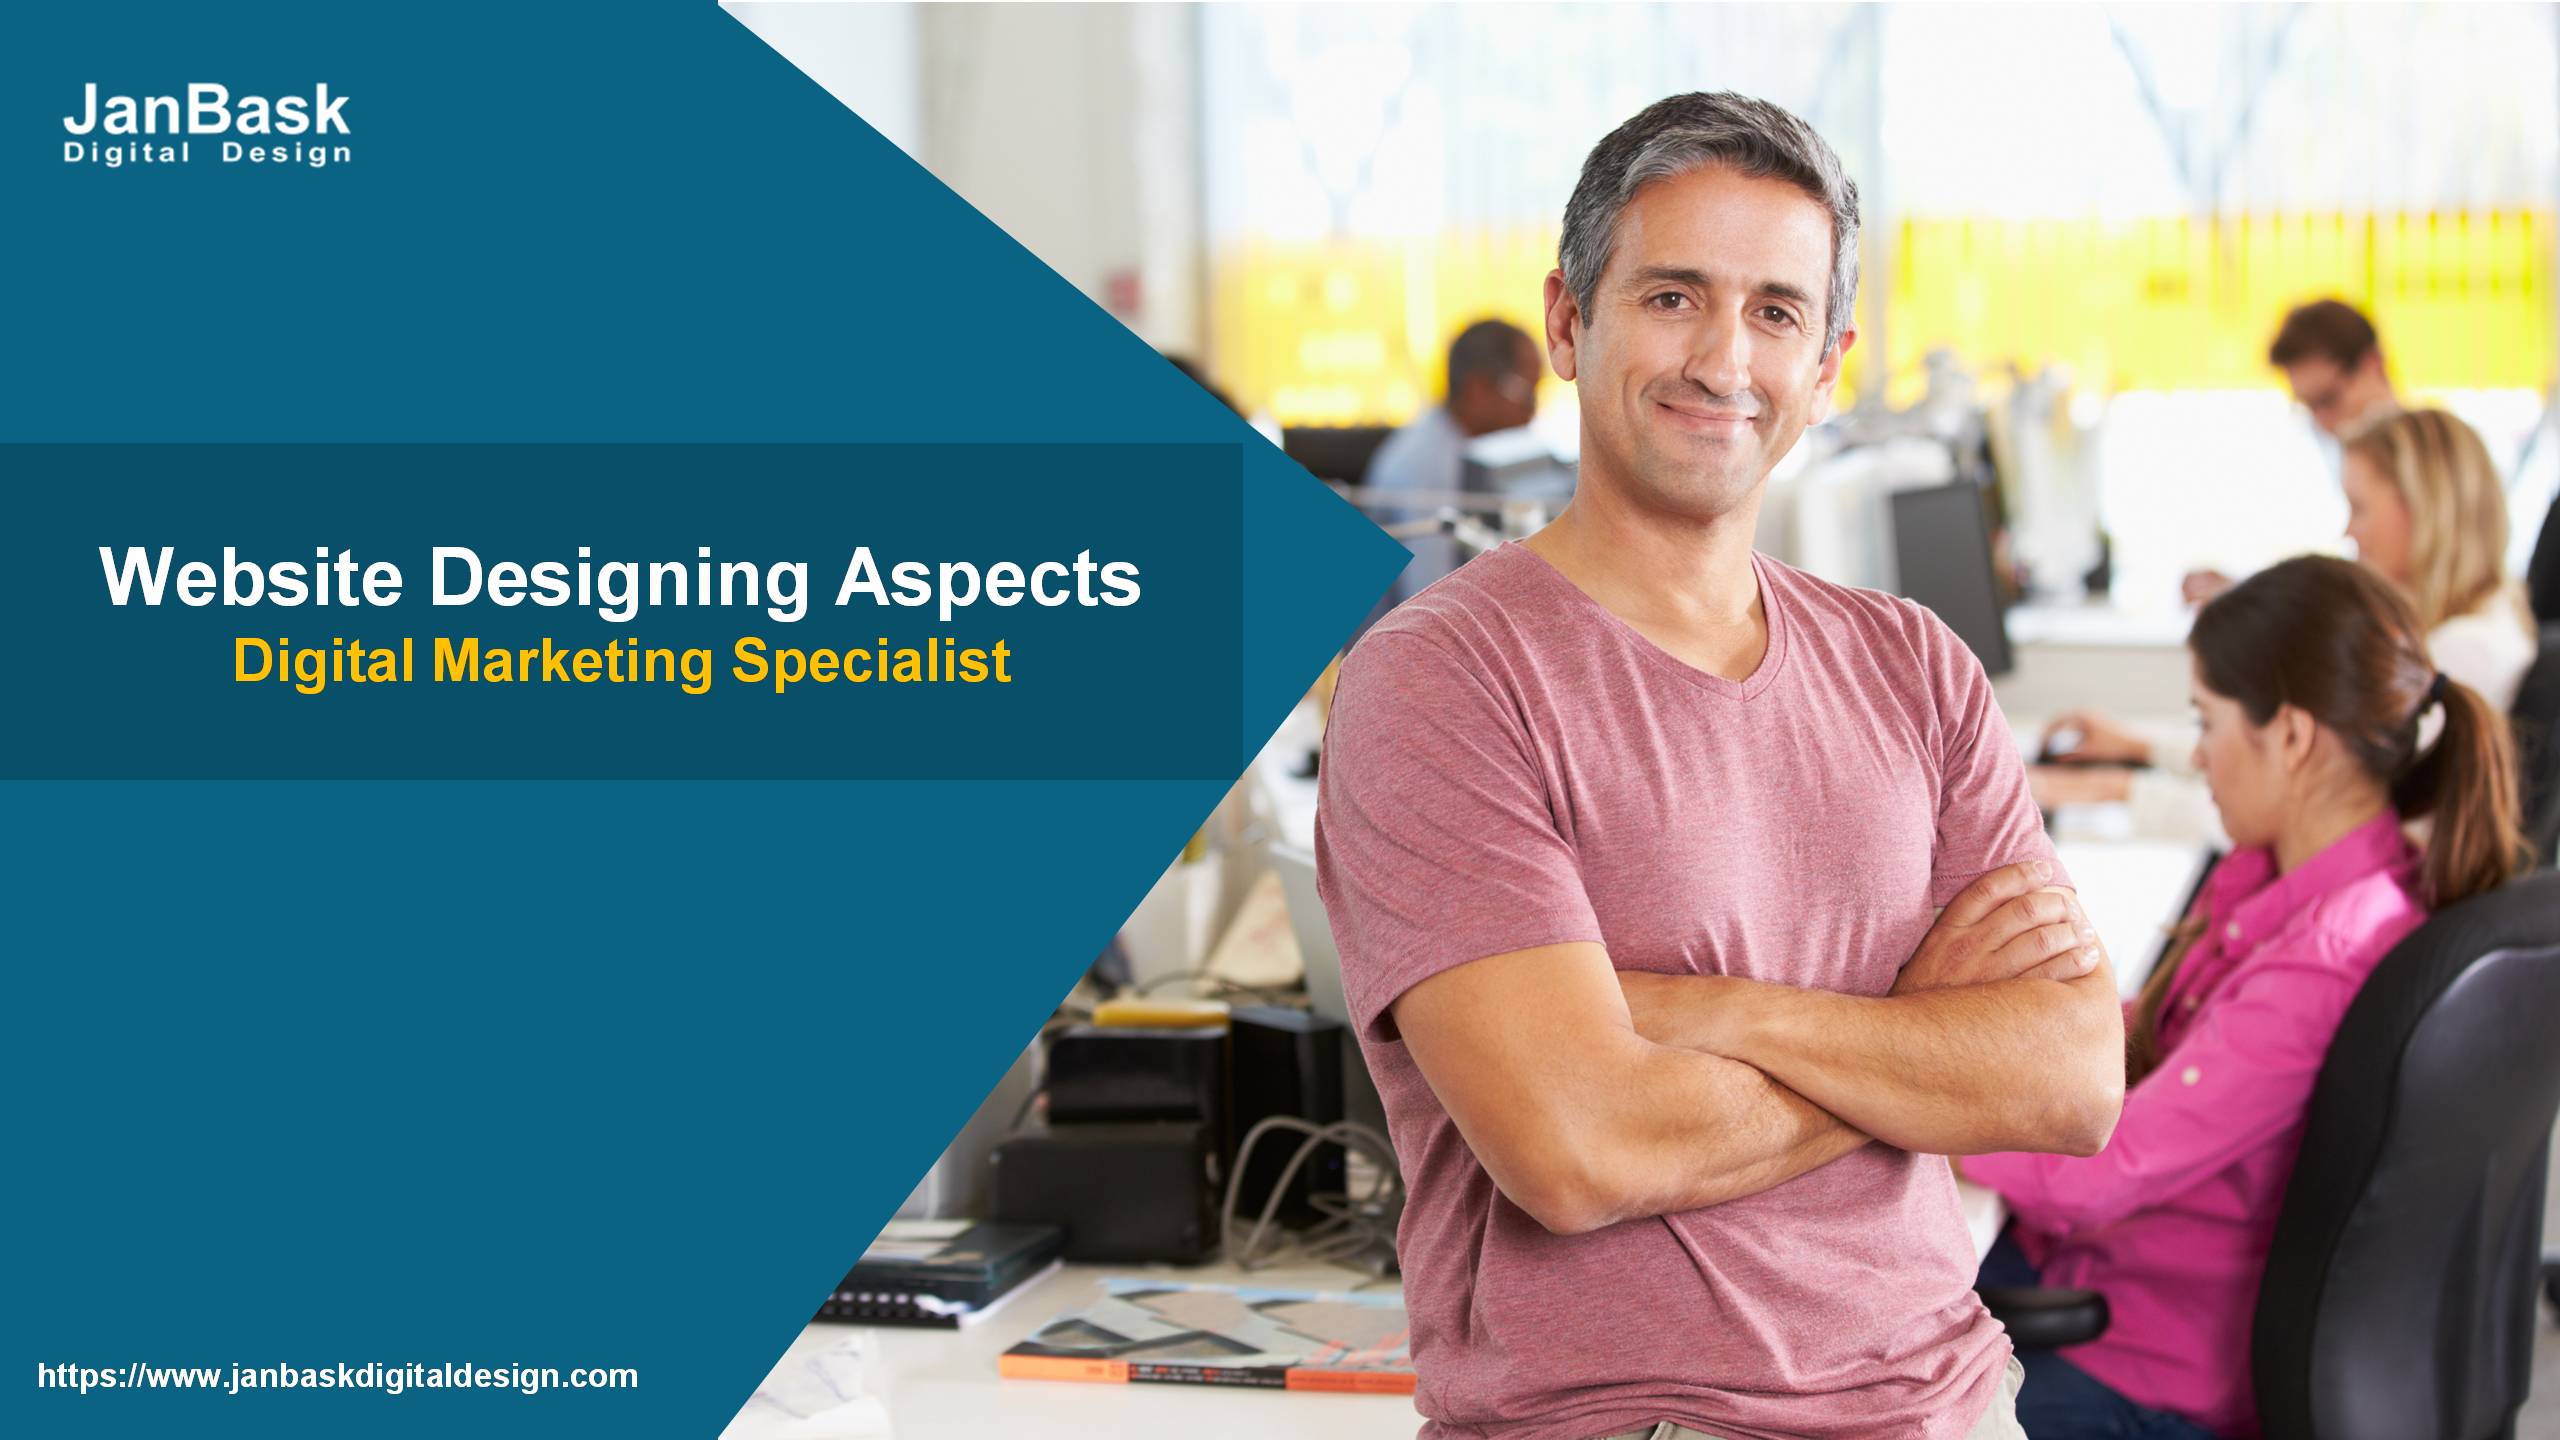 Website Designing Aspects for the Digital Marketing Specialist